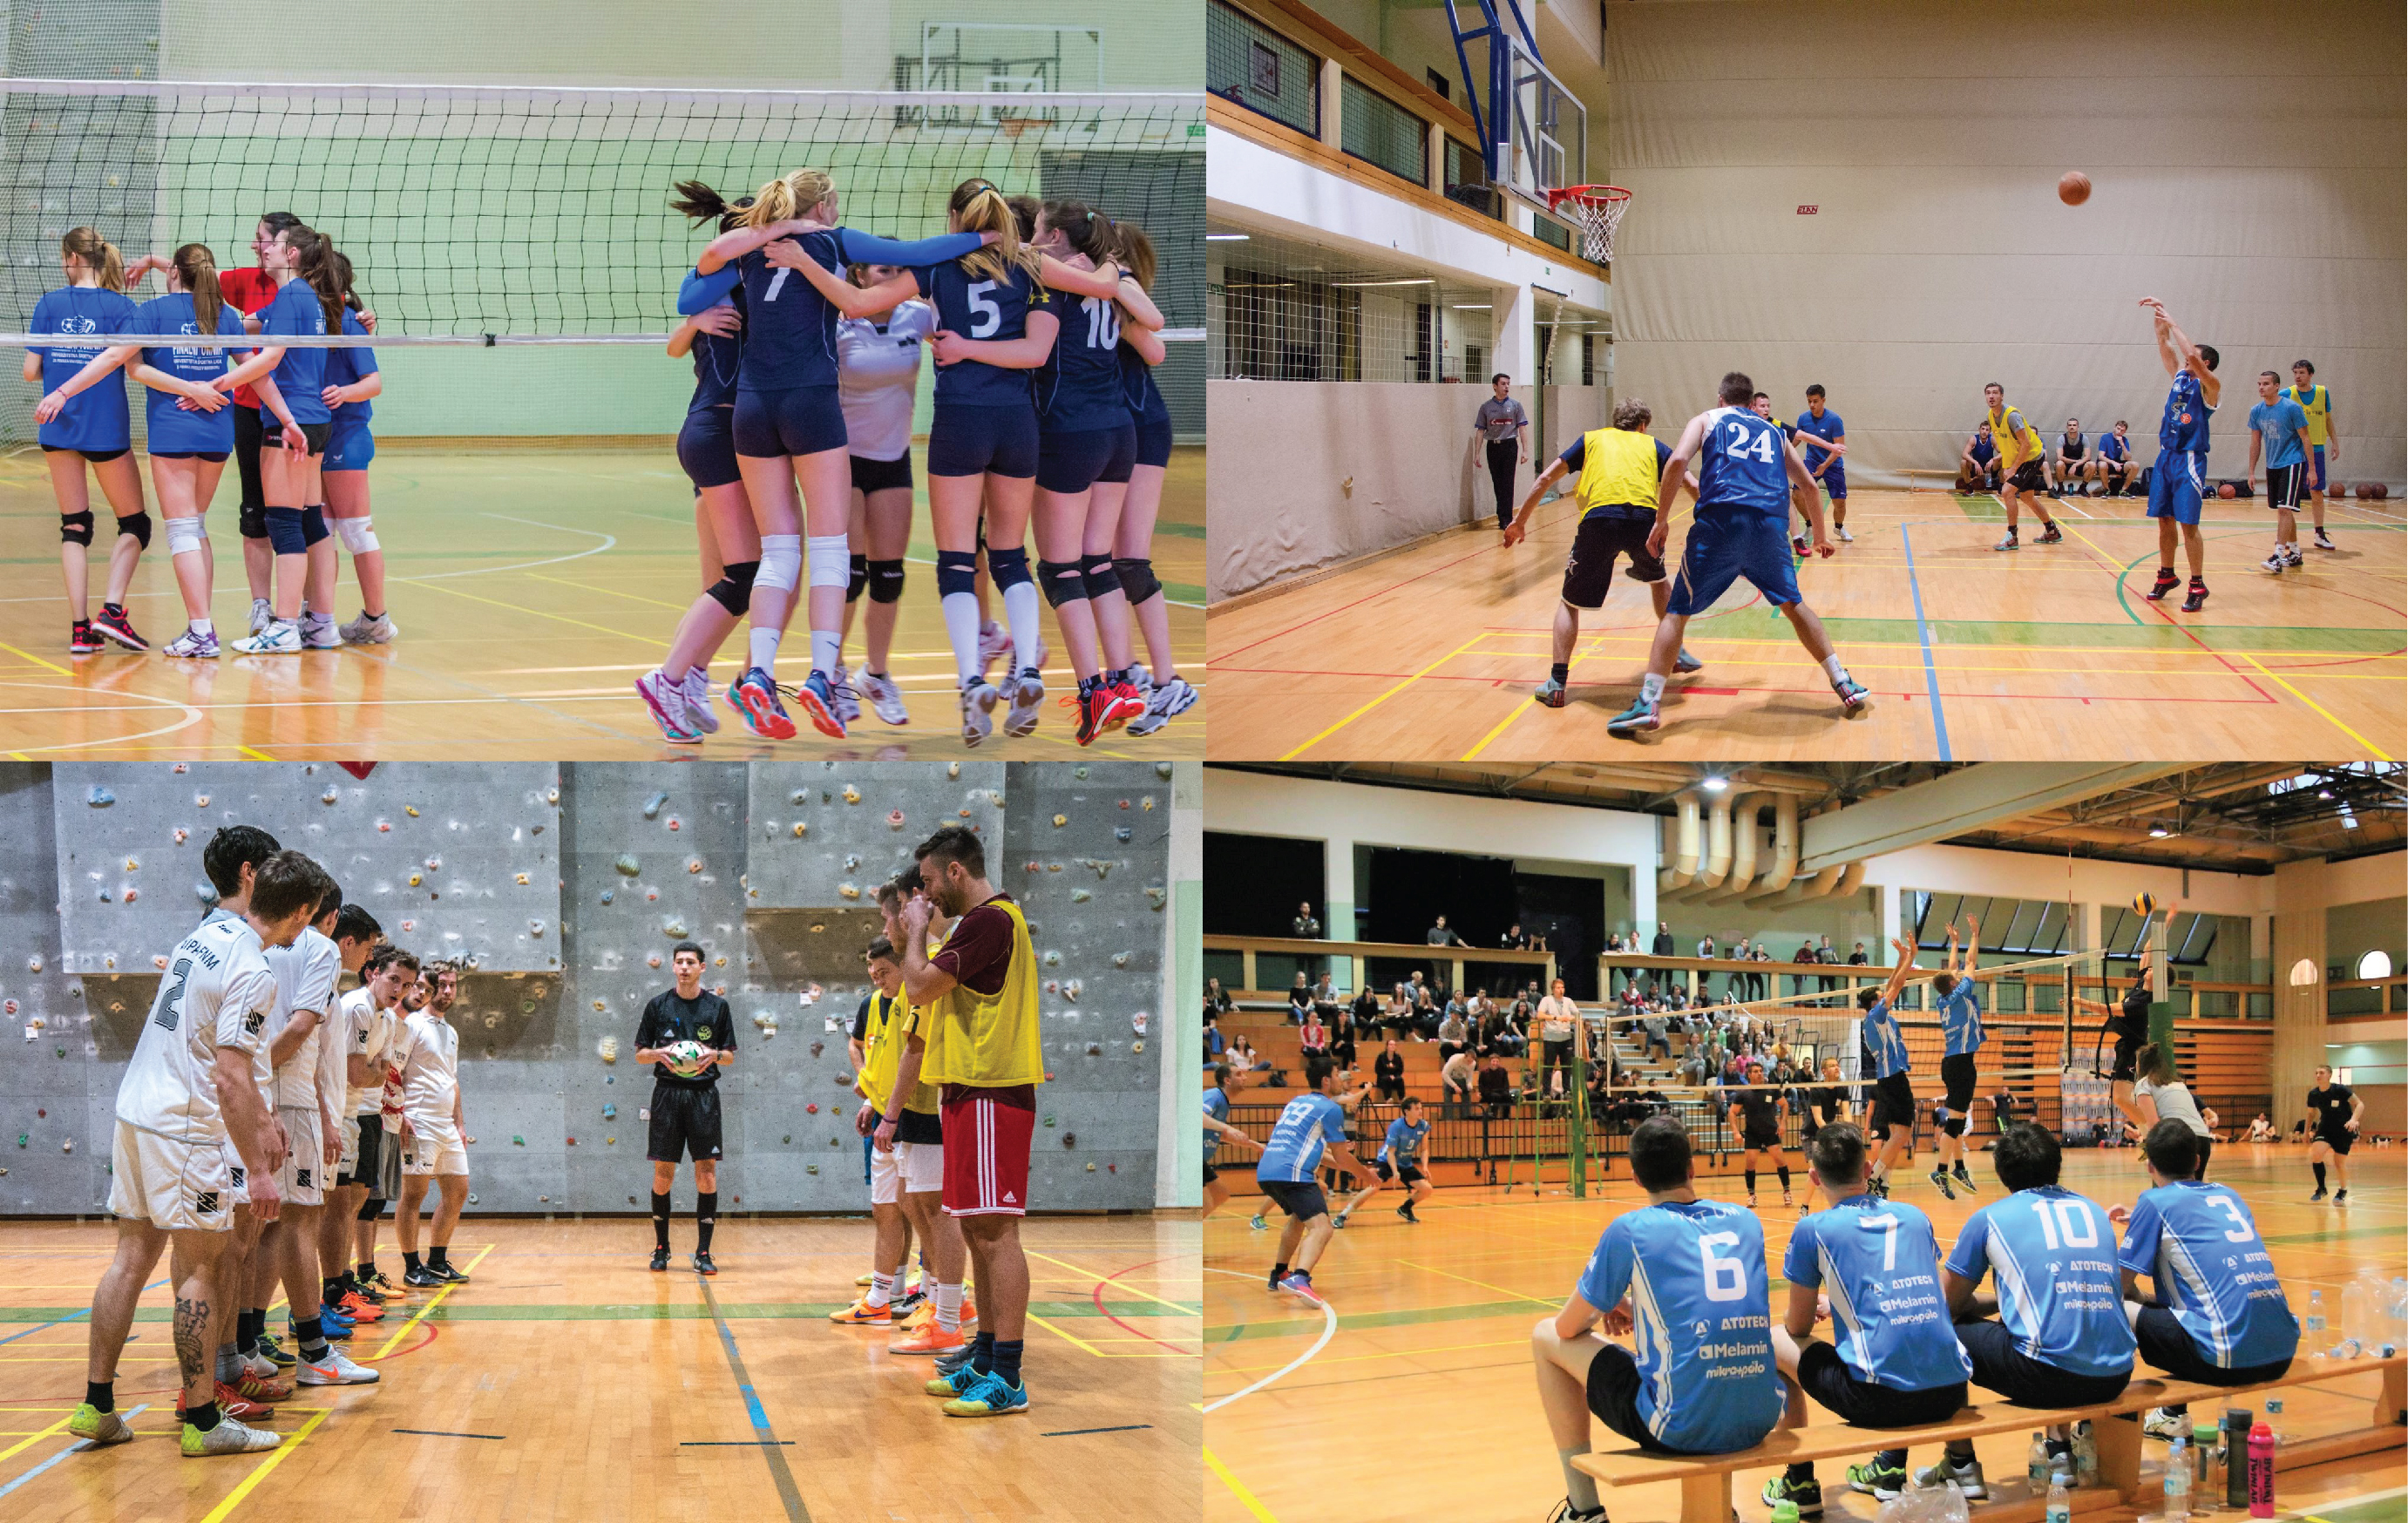 The University Sports League for the Champion of the University of Maribor